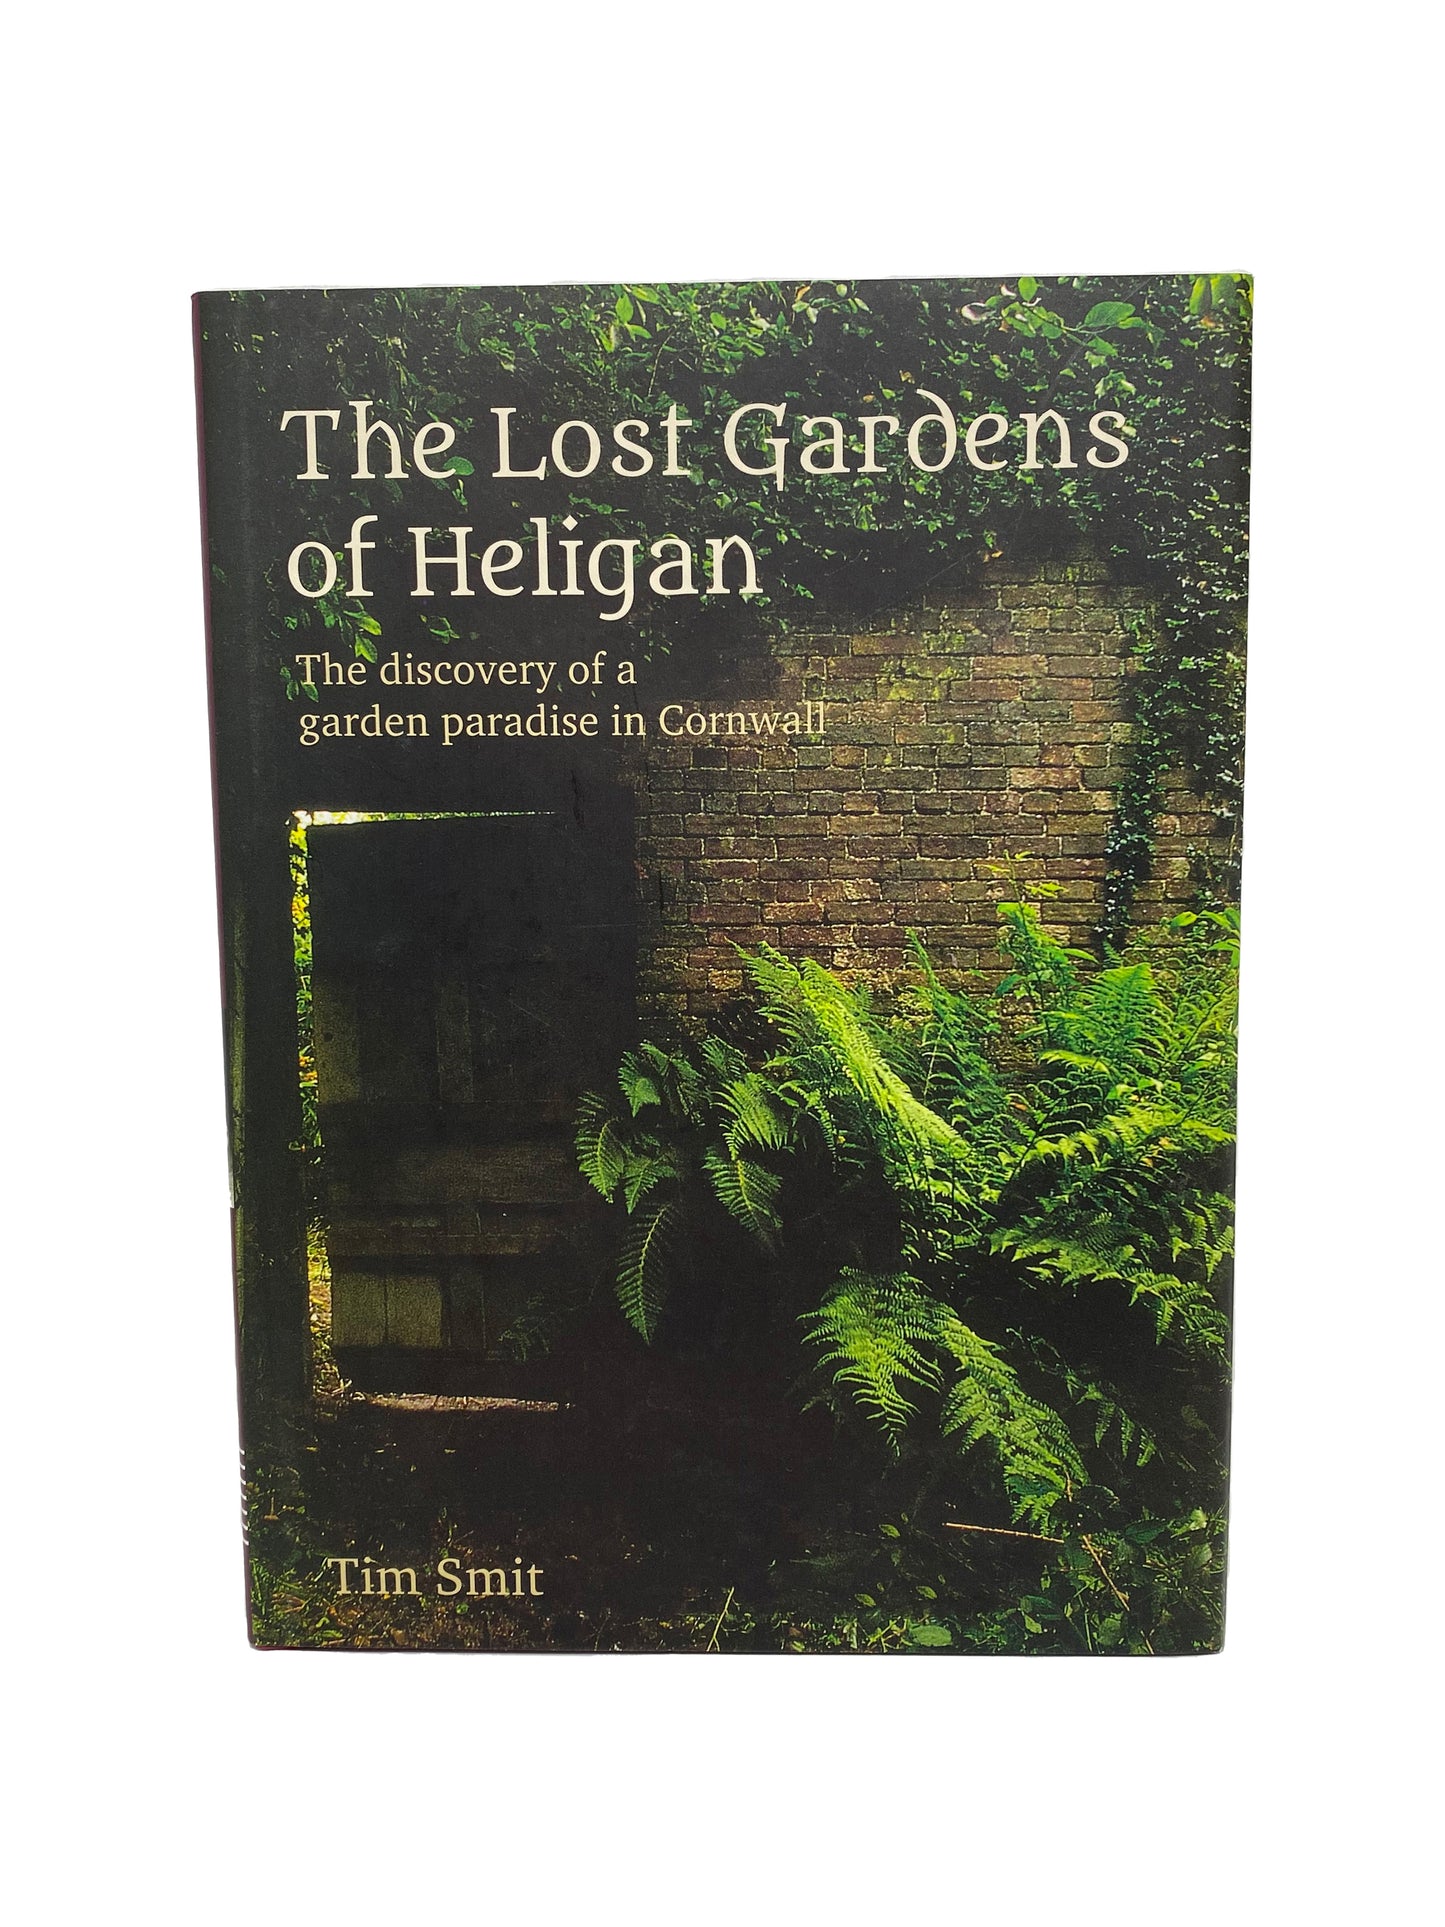 The Lost Gardens of Heligan by Sir Tim Smit